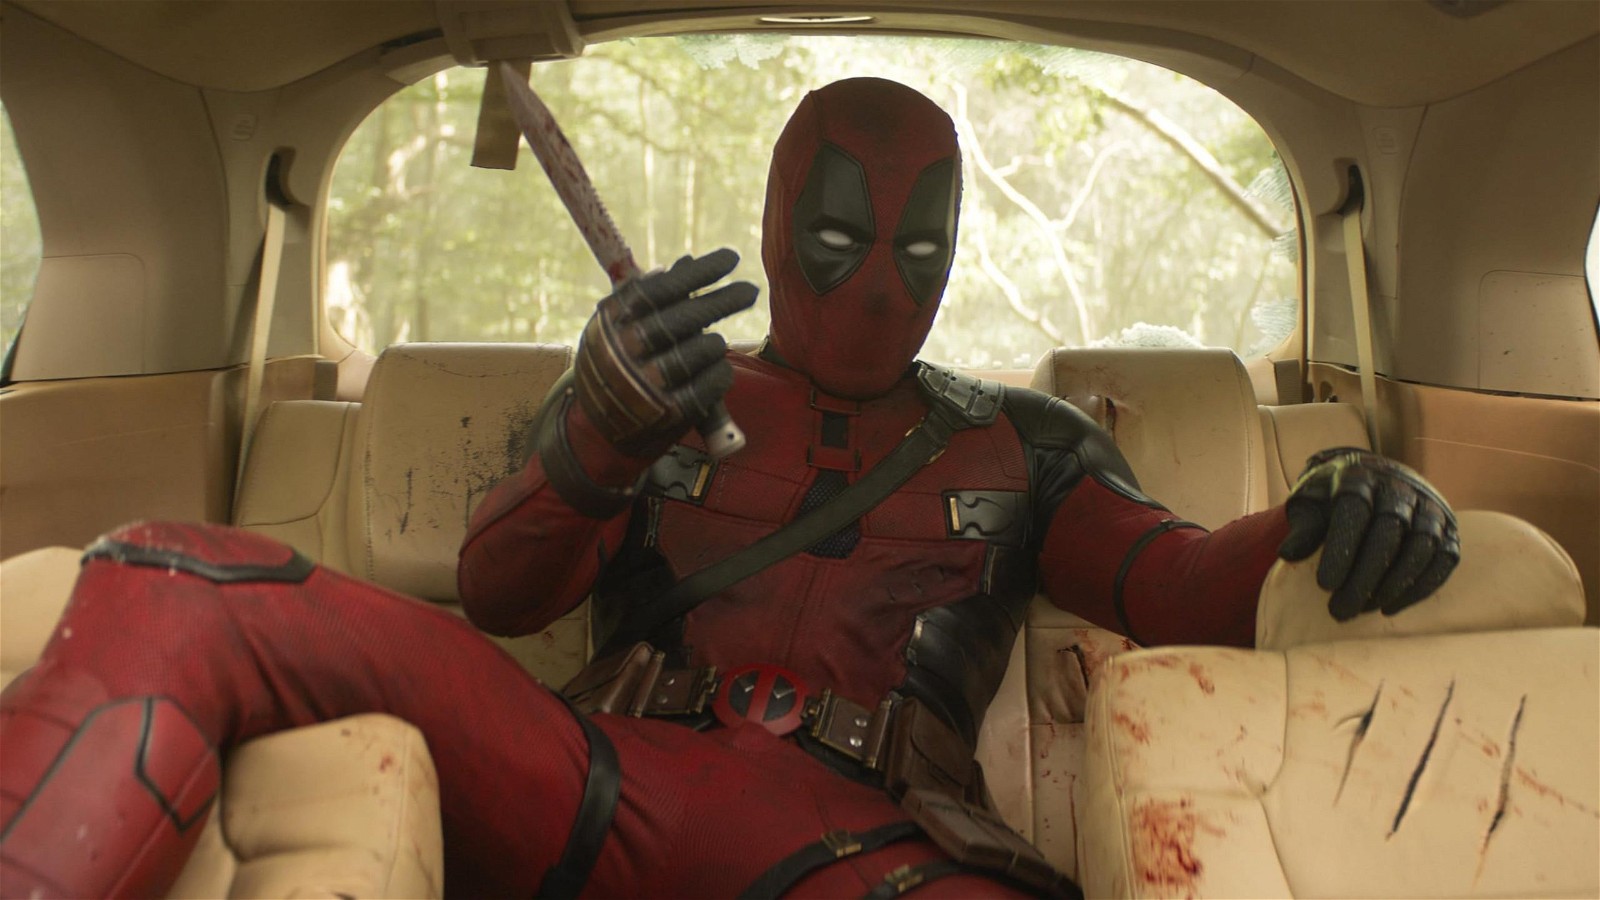 Deadpool 3 pairs The Merc With a Mouth with his frenemy Logan/ Wolverine